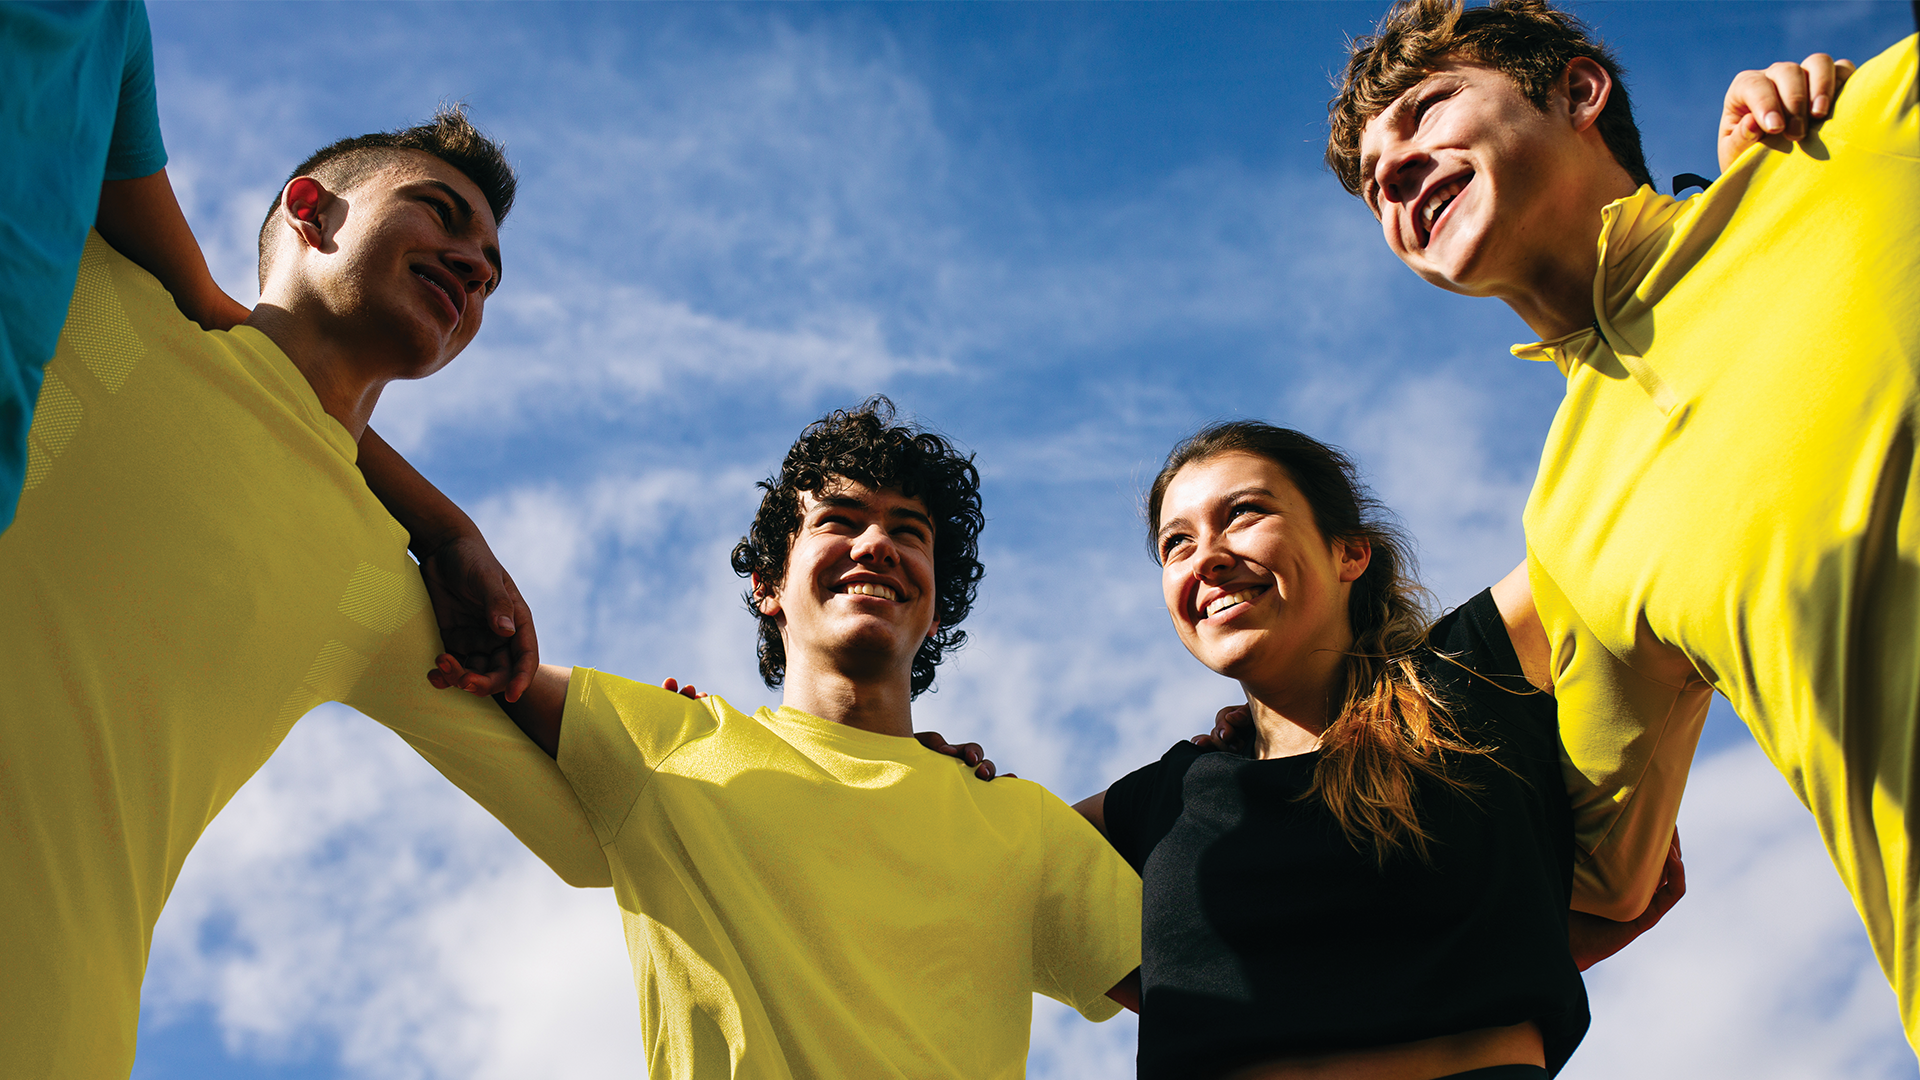 Four young people outdoors in yellow tshirts. They have their arms around each other and are all smiling. The camera is pointing up towards them to see the blue sunny sky and clouds in the background.